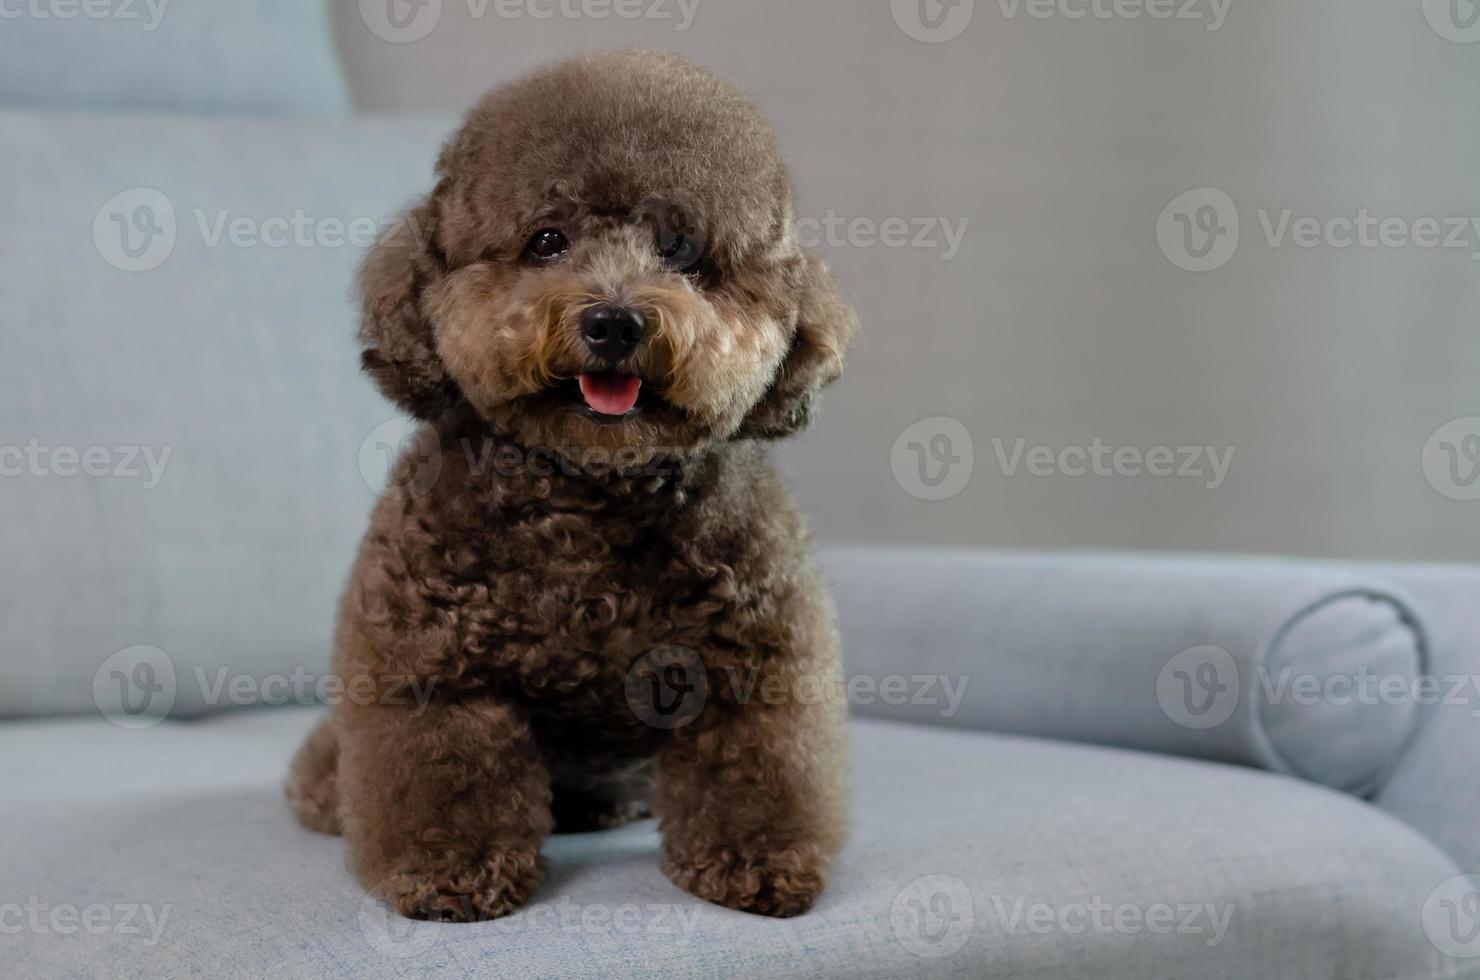 Adorable smiling black Poodle dog sitting and relaxing alone on blue couch photo